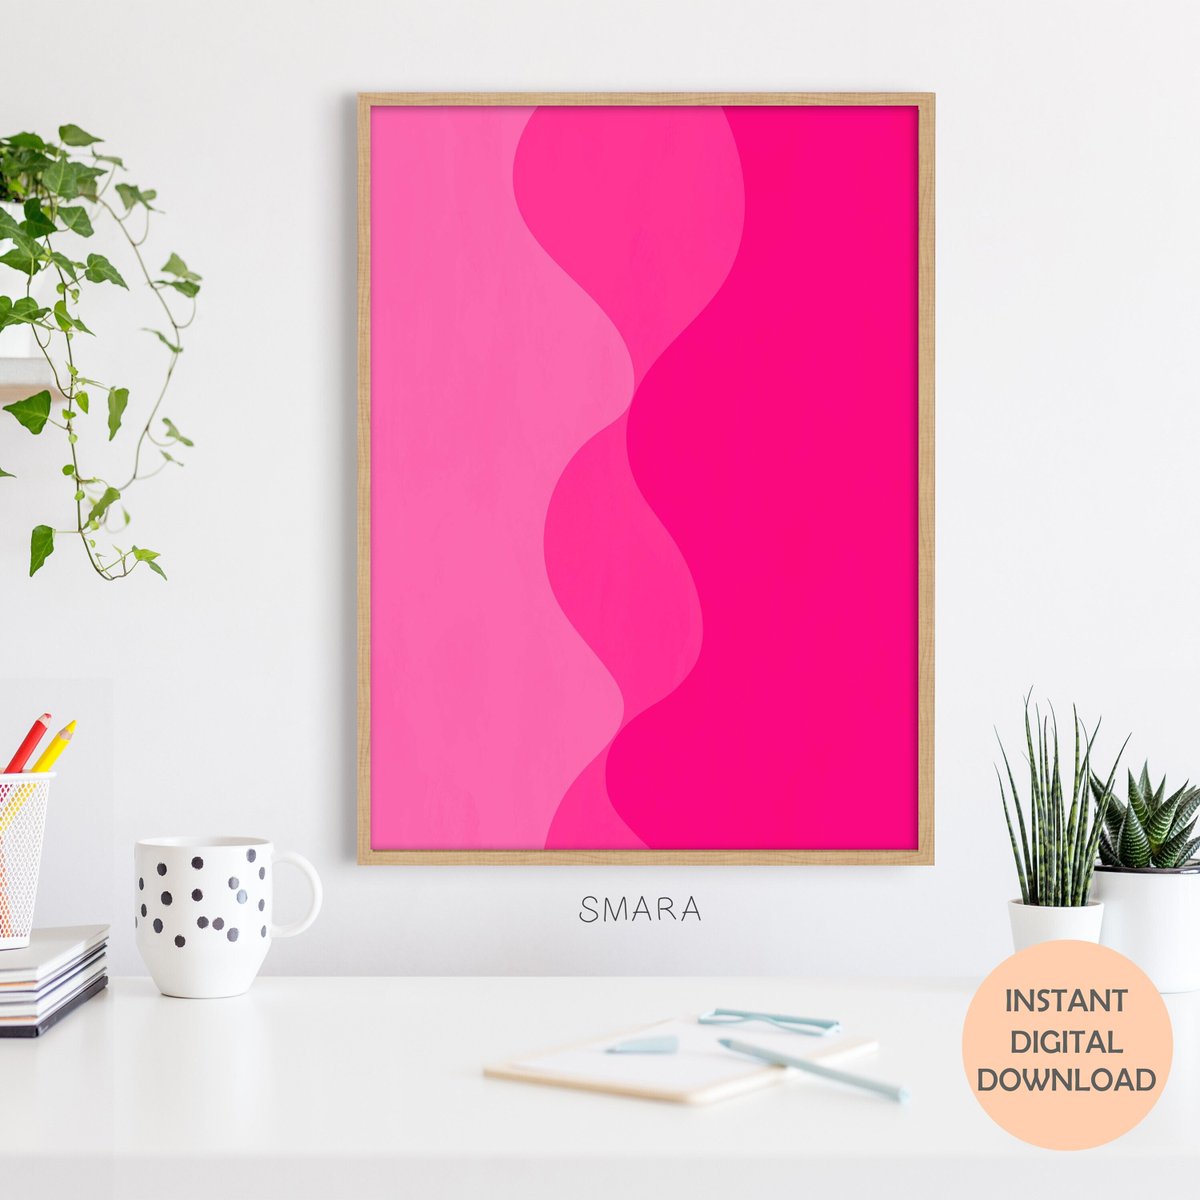 Excited to share the latest addition to my #etsy shop: Printable Wall Art: Wavy Abstract, Hot Pink, Fuchsia etsy.me/3DbtFz6 #pink #moving #valentinesday #unframed #bedroom #midcentury #abstractgeometric #vertical #brightabstractart